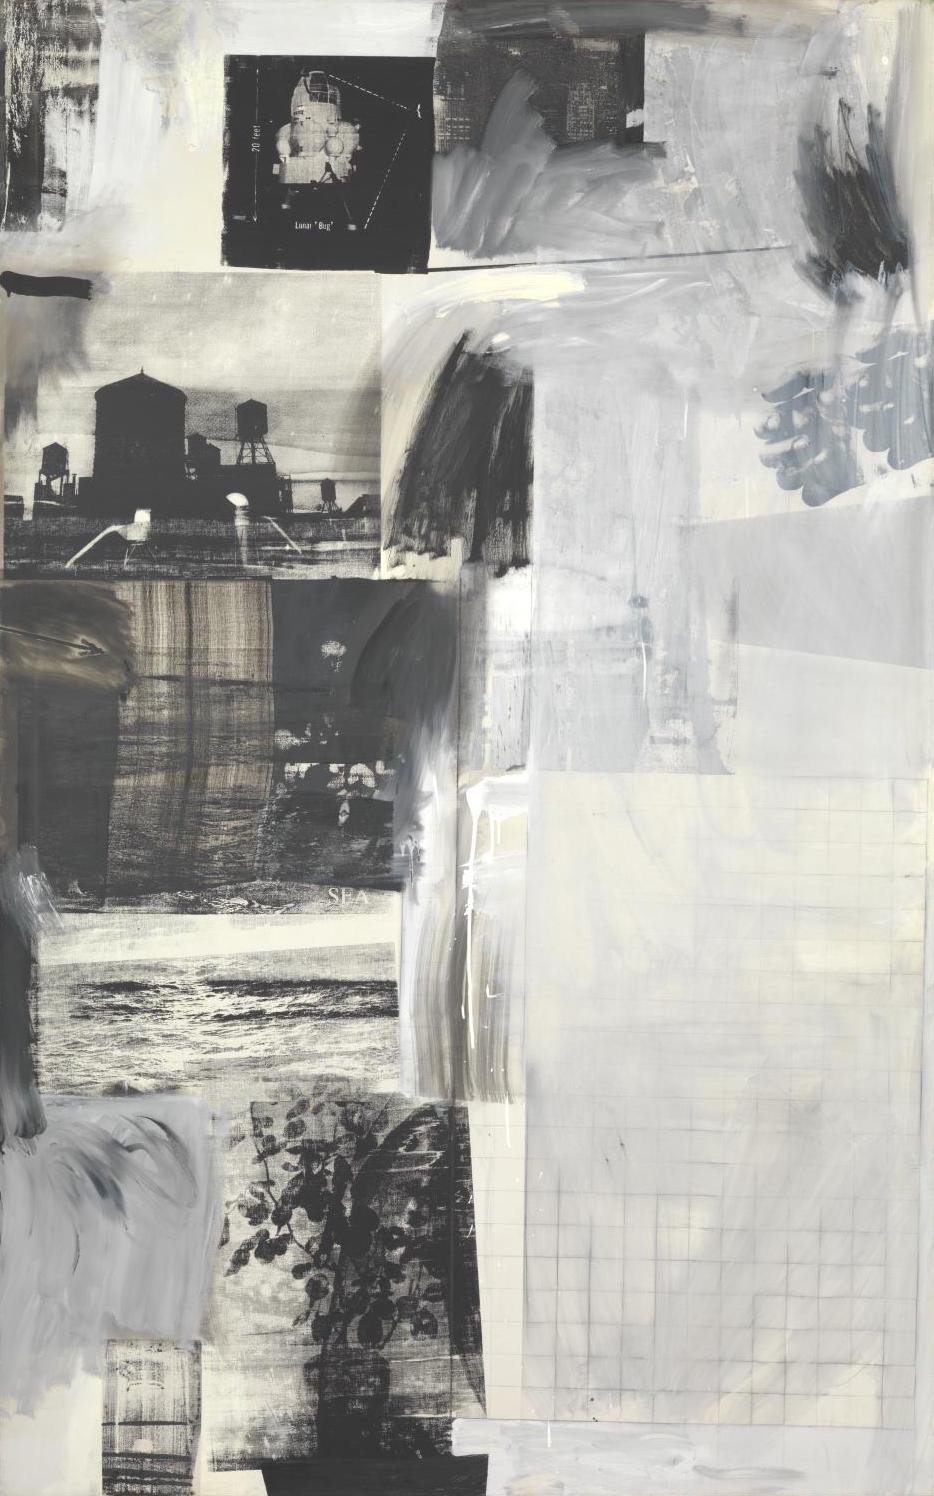 Example of Neo-Dada work by Robert Rauschenberg, Almanac, 1962, showing also continuous use of erasure as formal and conceptual tool (© Robert Rauschenberg Foundation, image: Tate)